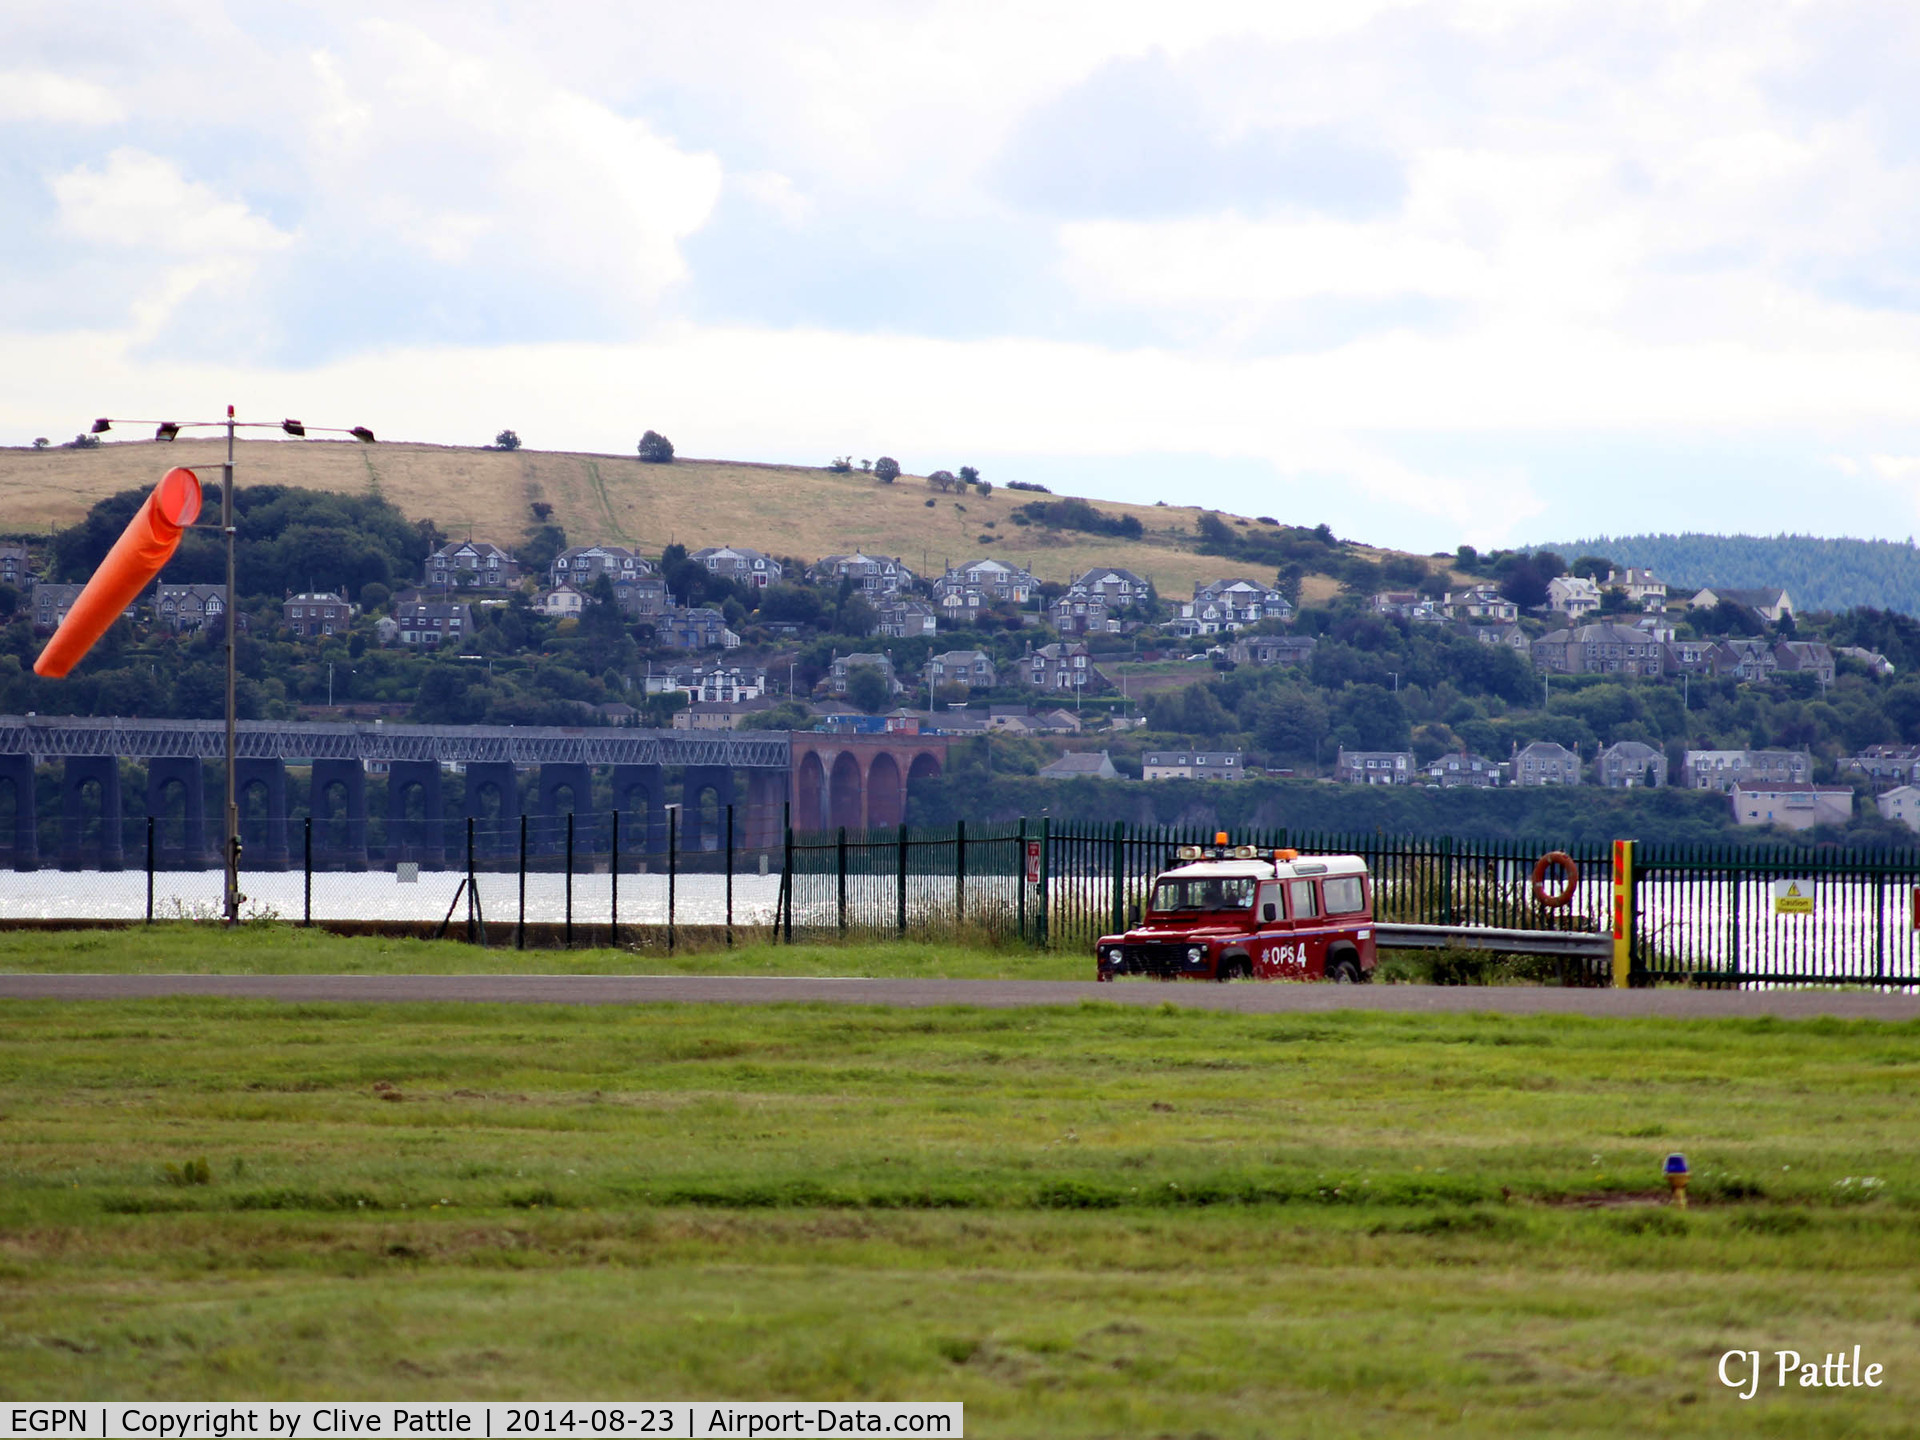 Dundee Airport, Dundee, Scotland United Kingdom (EGPN) - Rescue/Safety vehicle always on duty at Dundee Riverside Airport.